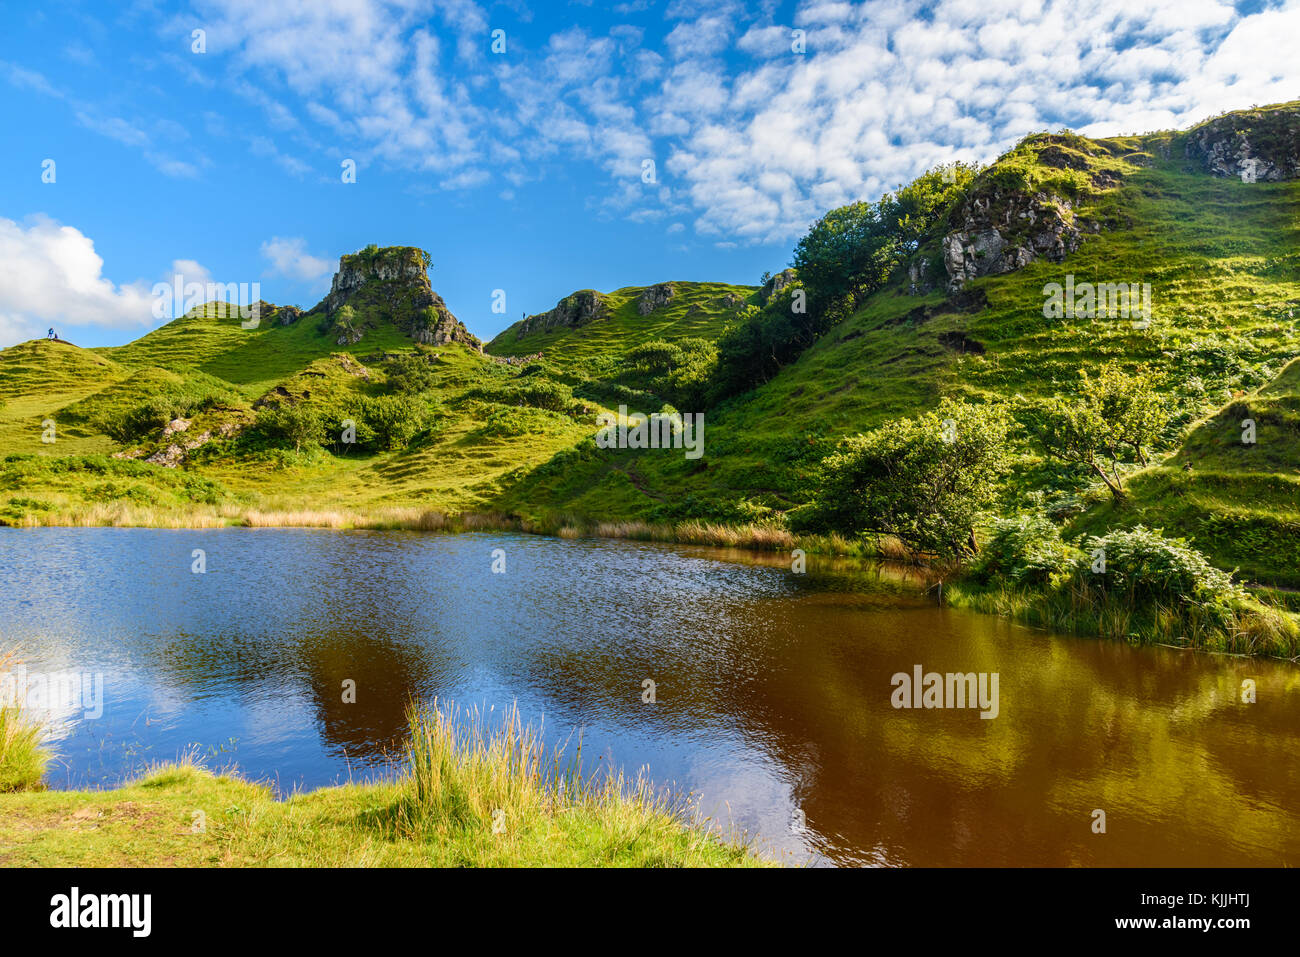 The Very Green Nature Of The Mystic Fairy Glen In The Isle Of Skye